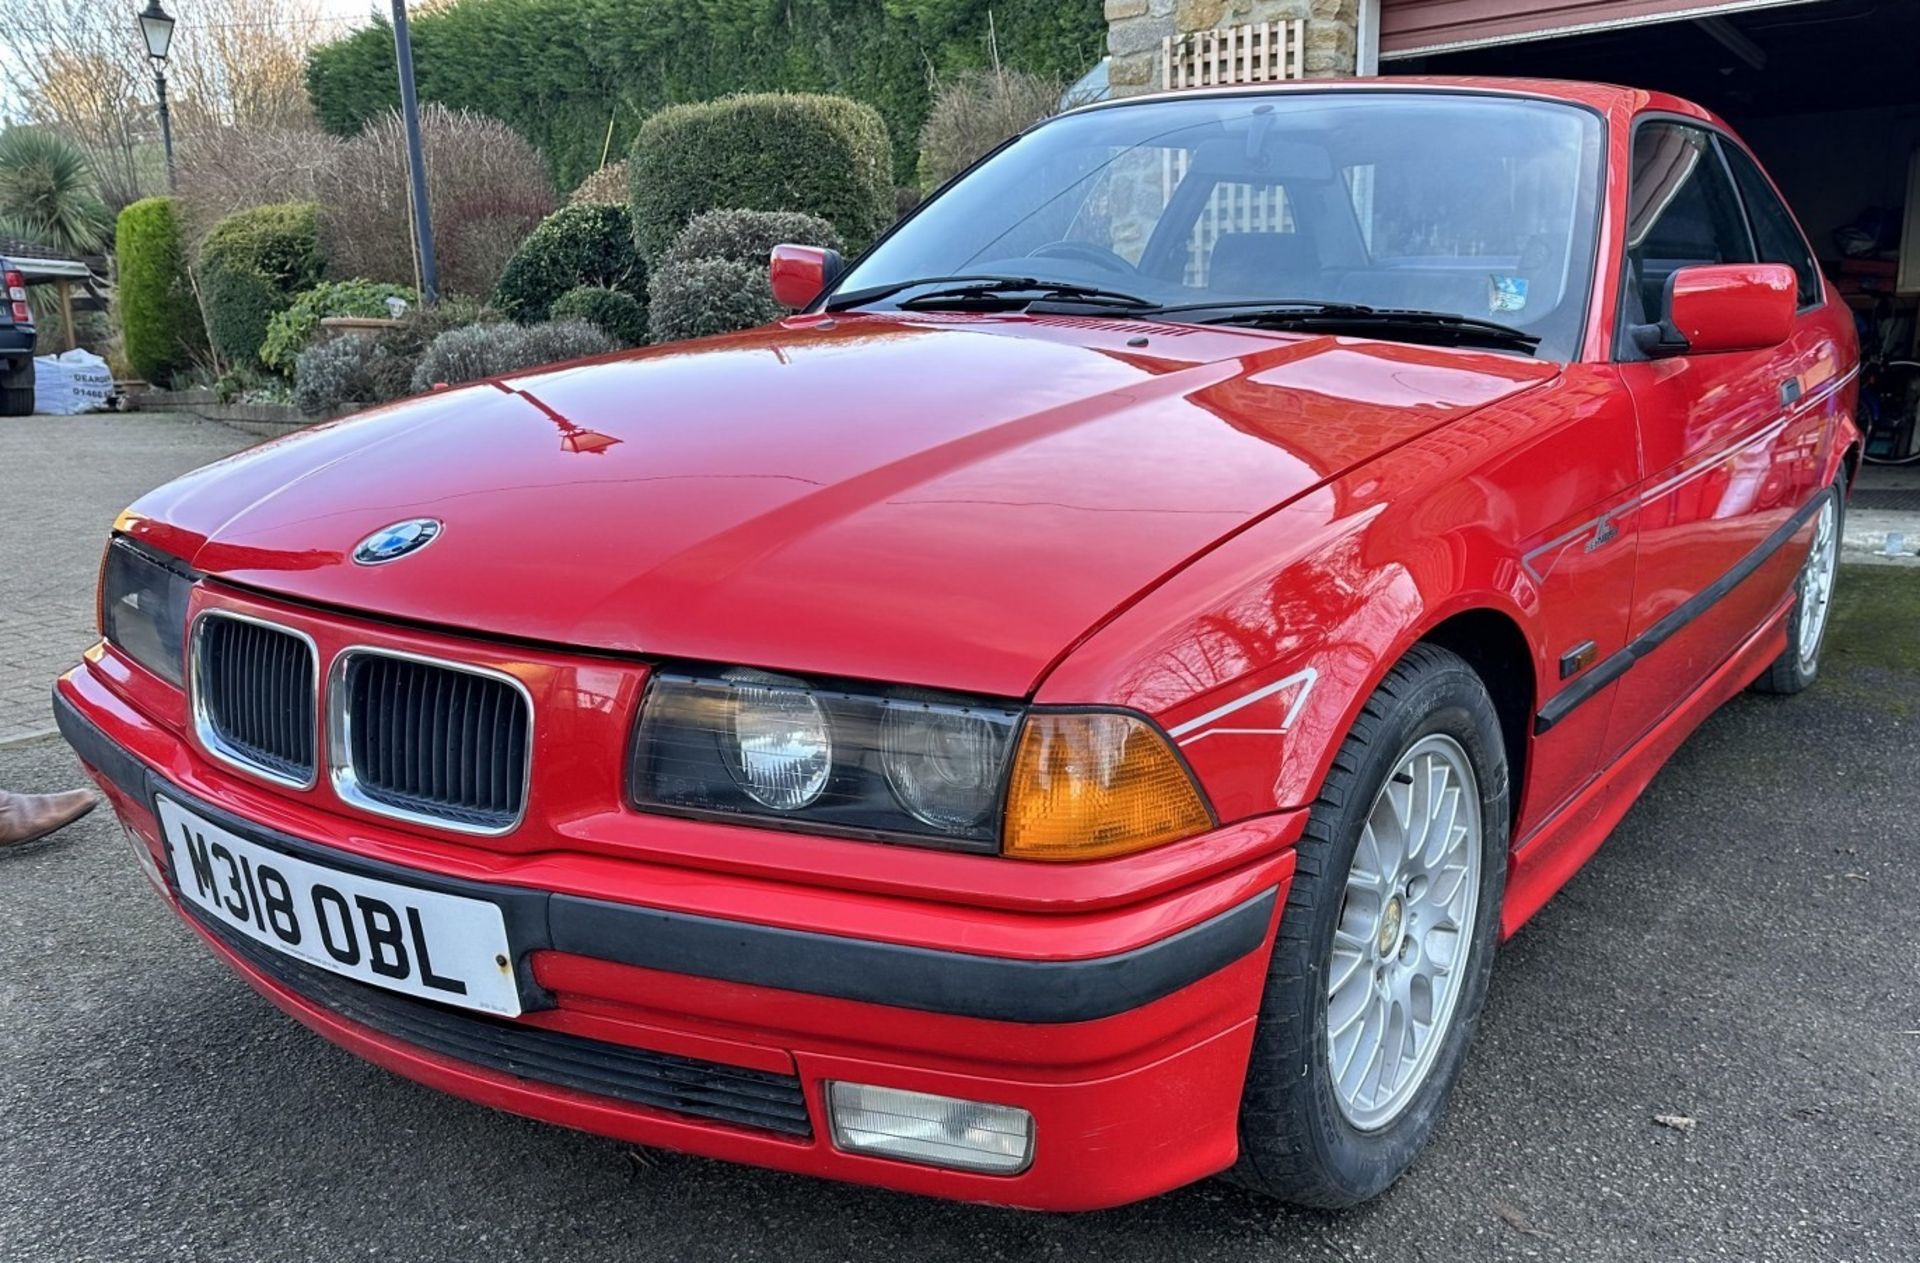 1995 BMW AC Schnitzer 318is E36 Coupé Registration number M318 0BL Chassis number - Image 2 of 30